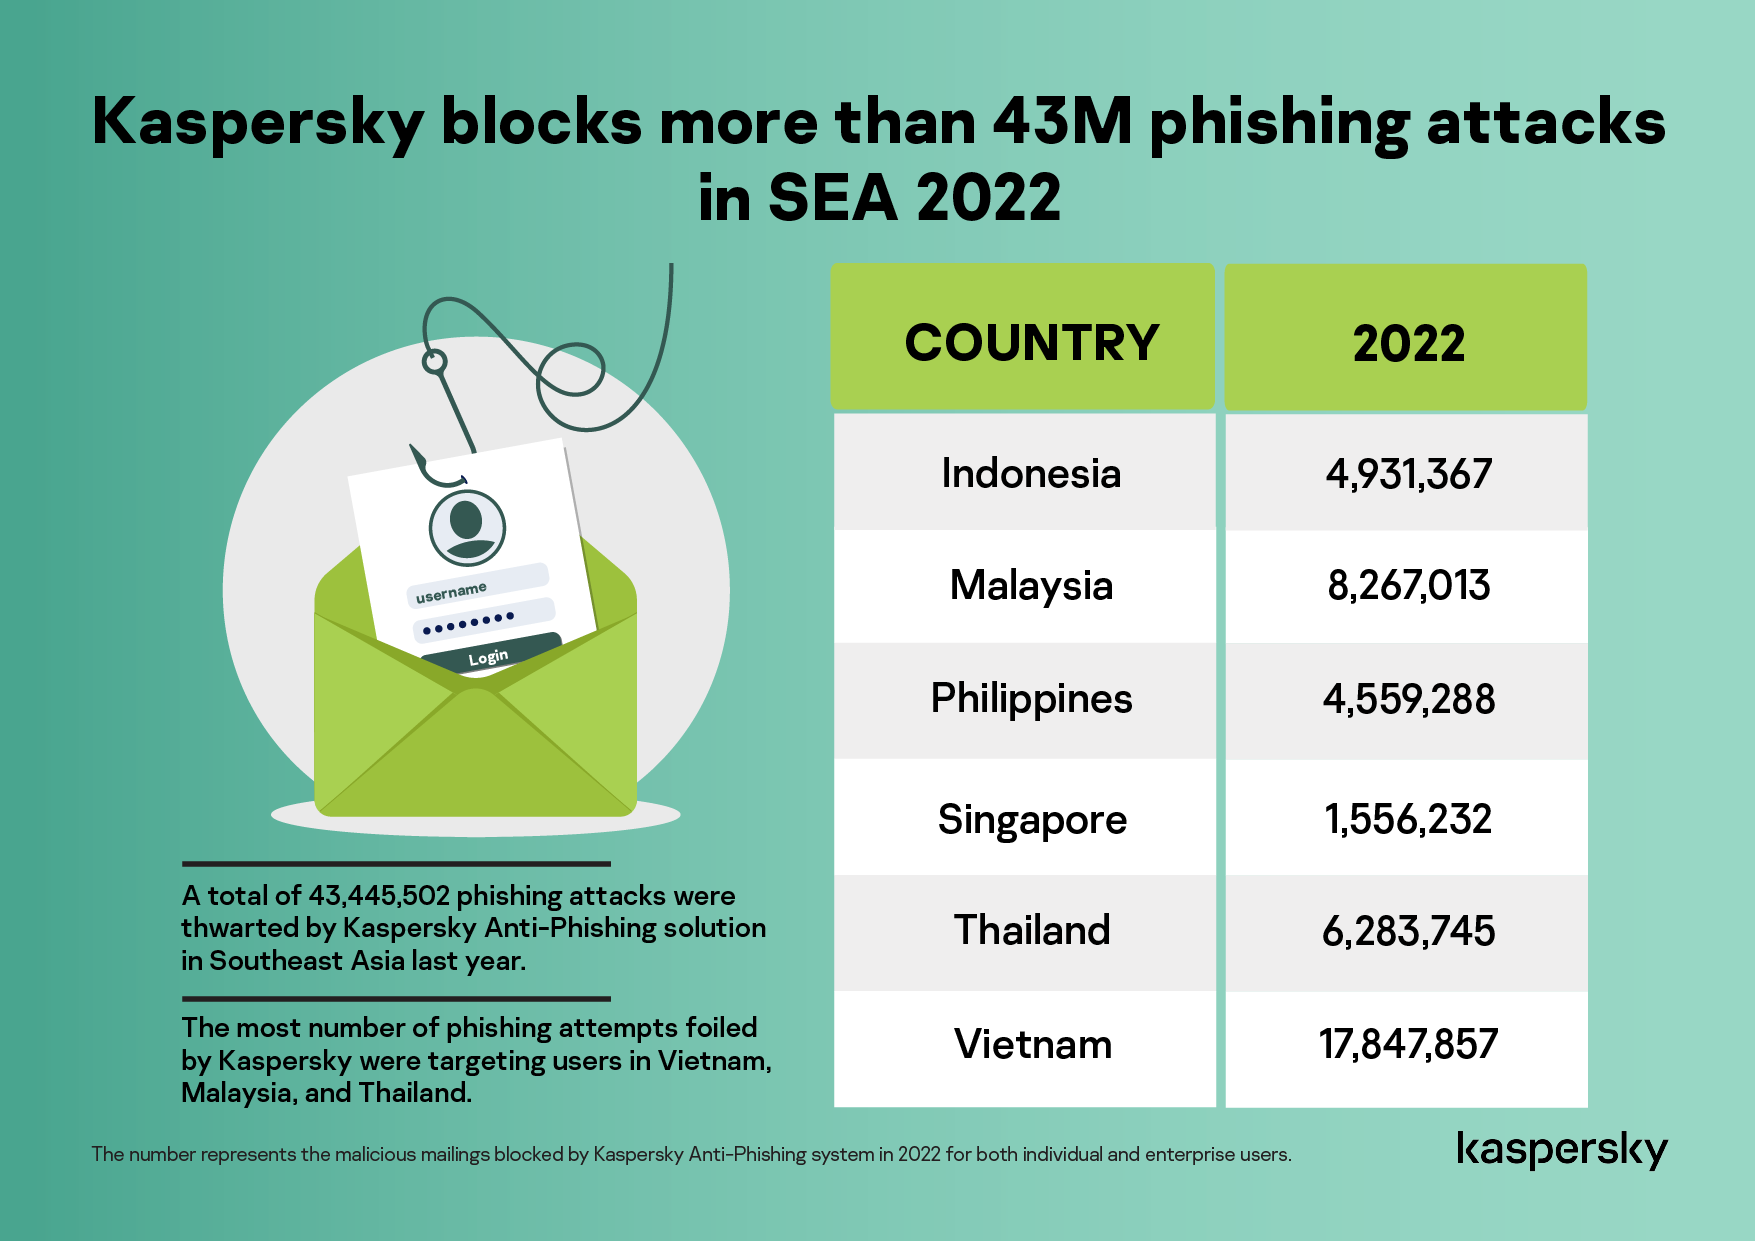 Methodology: The number represents the malicious mailings blocked by the Kaspersky Anti-Phishing system in 2022 in Malaysia for both individual and enterprise users.